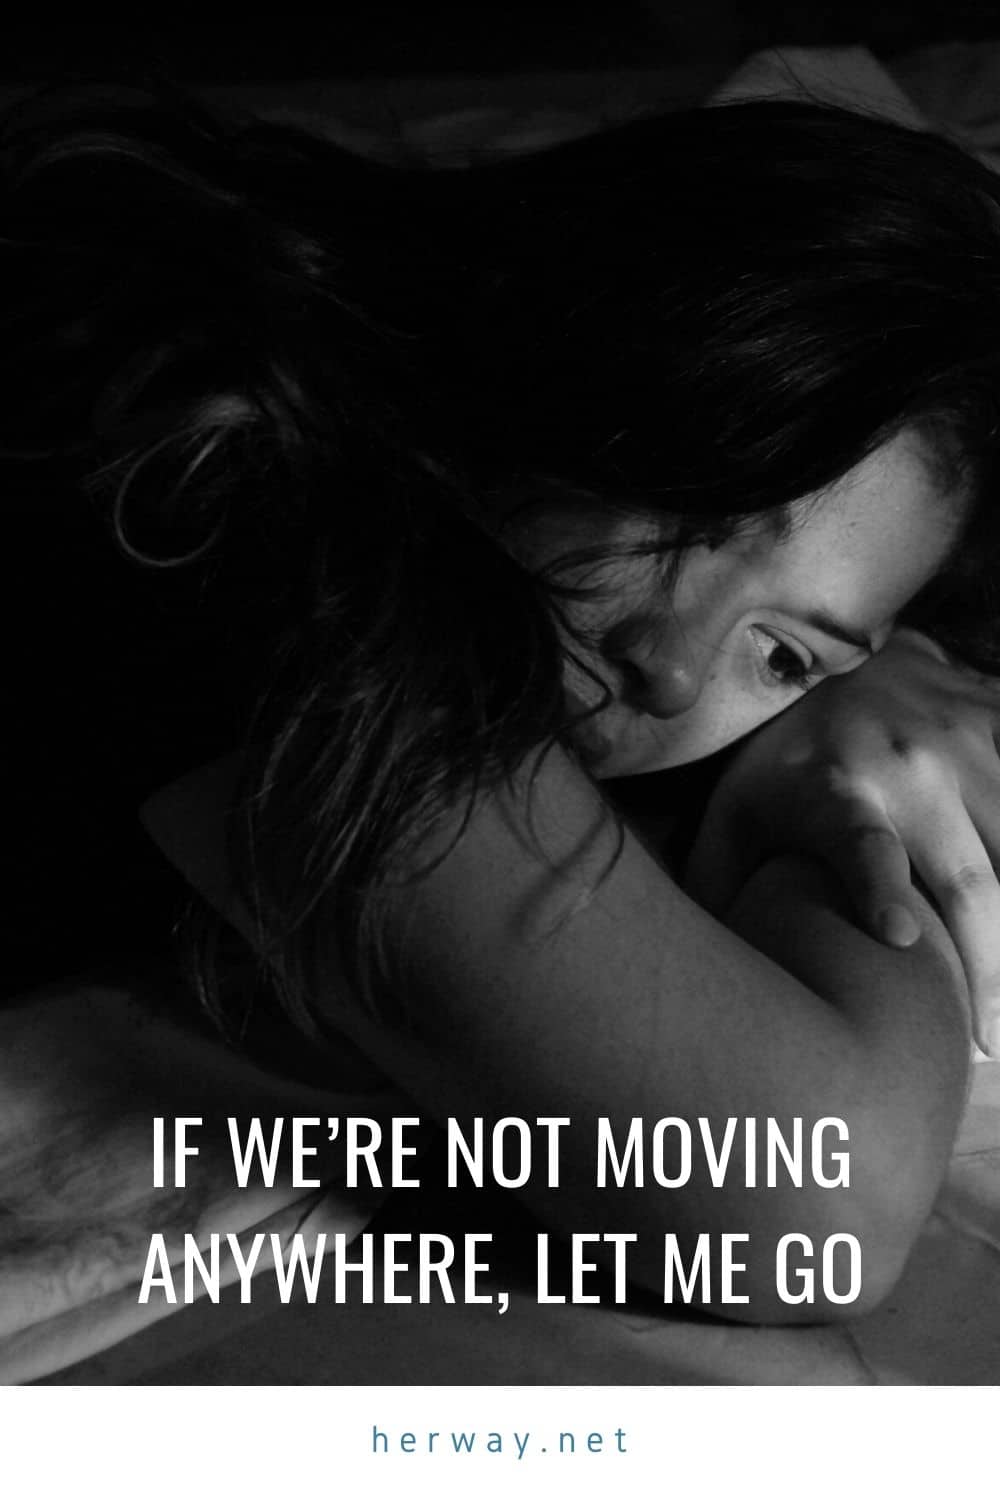 IF WE’RE NOT MOVING ANYWHERE, LET ME GO